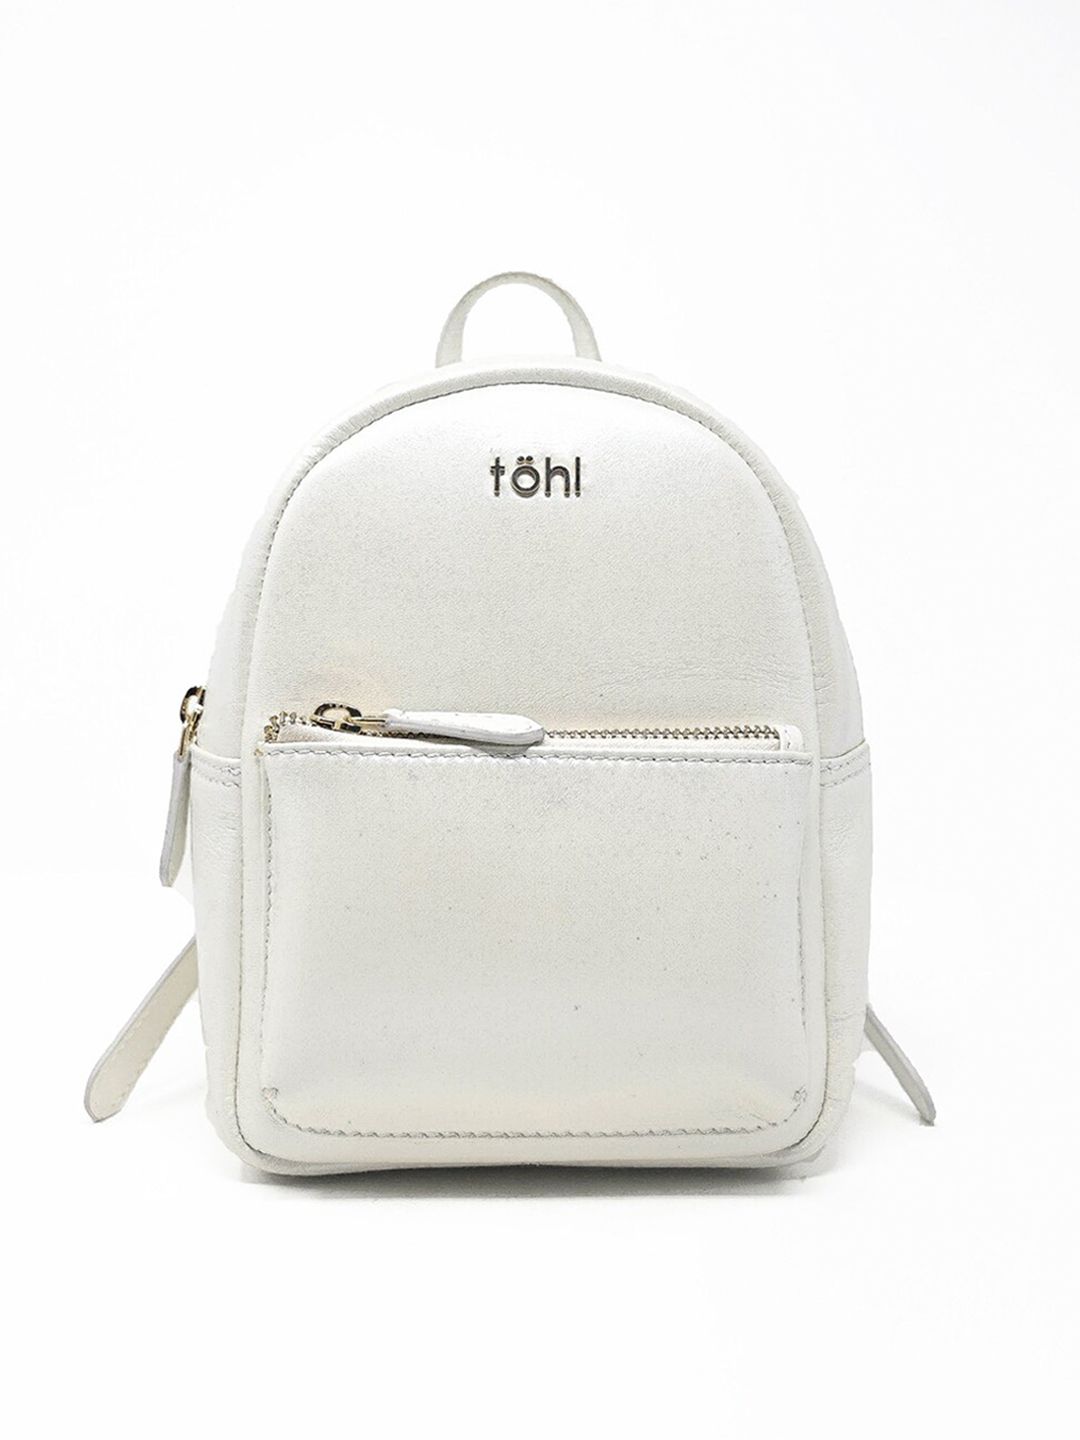 tohl Women Off White Backpack Price in India